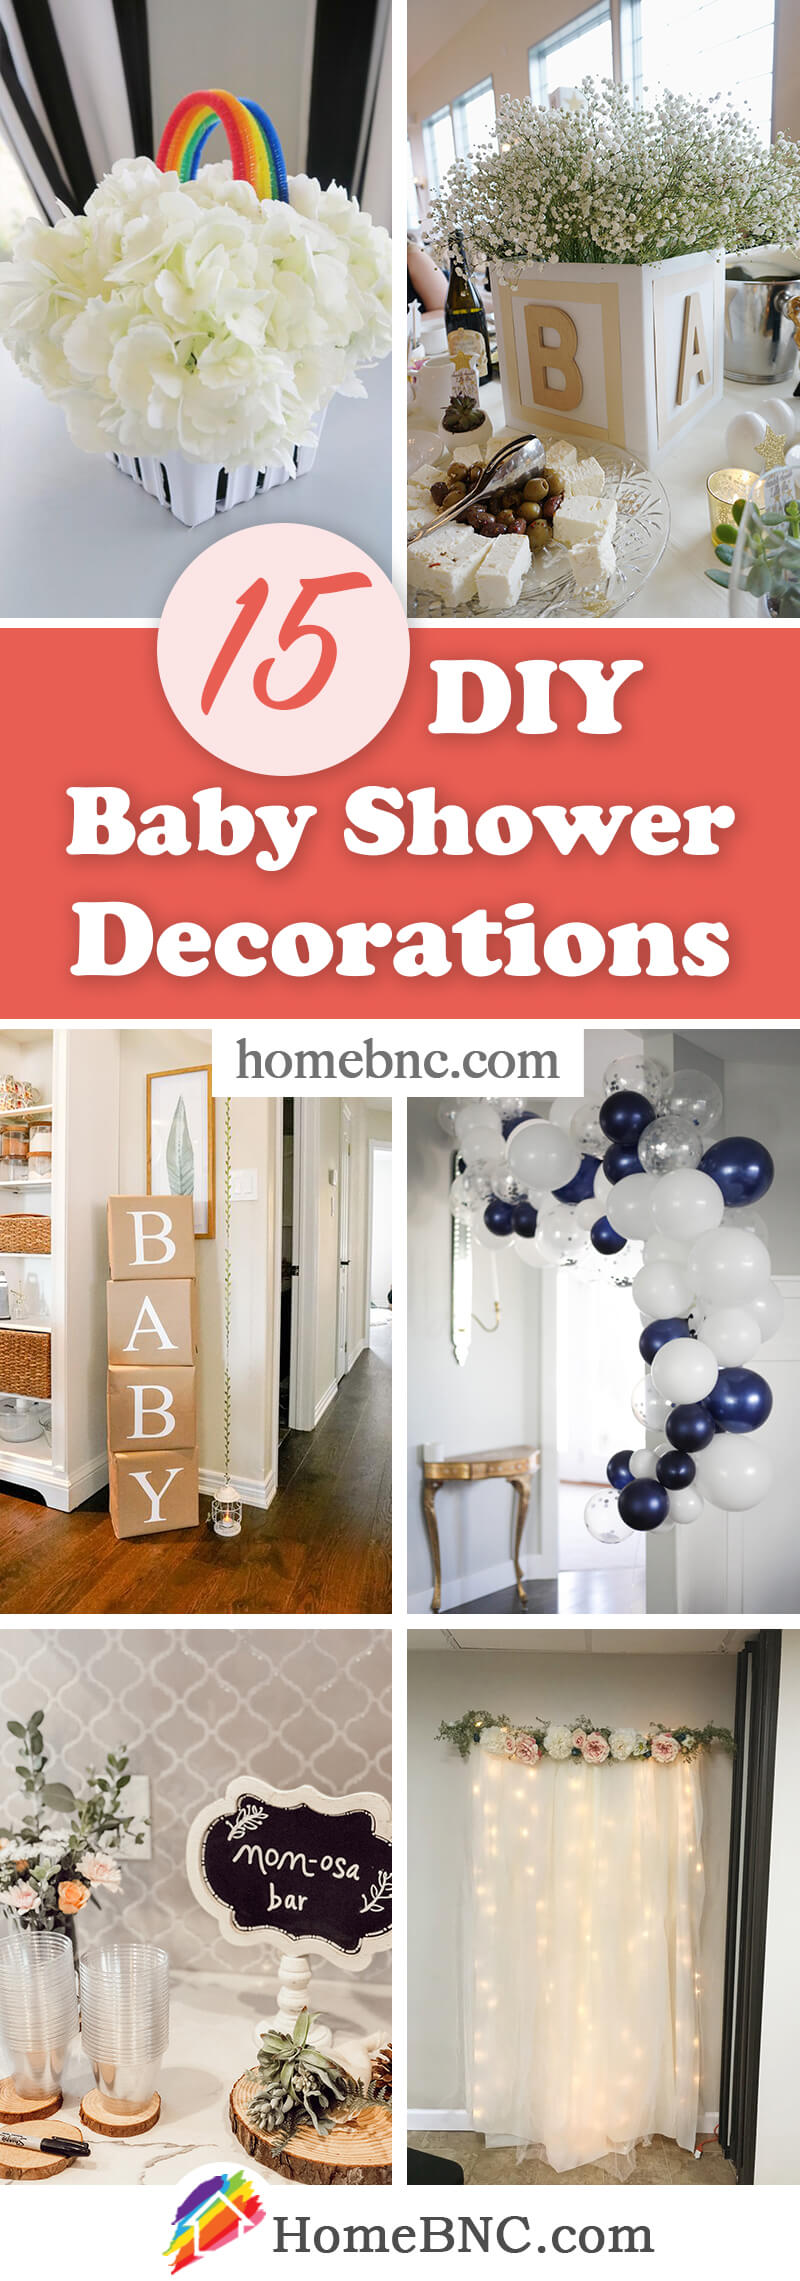 21+ Pretty Baby Shower Decoration Ideas - The Greenspring Home